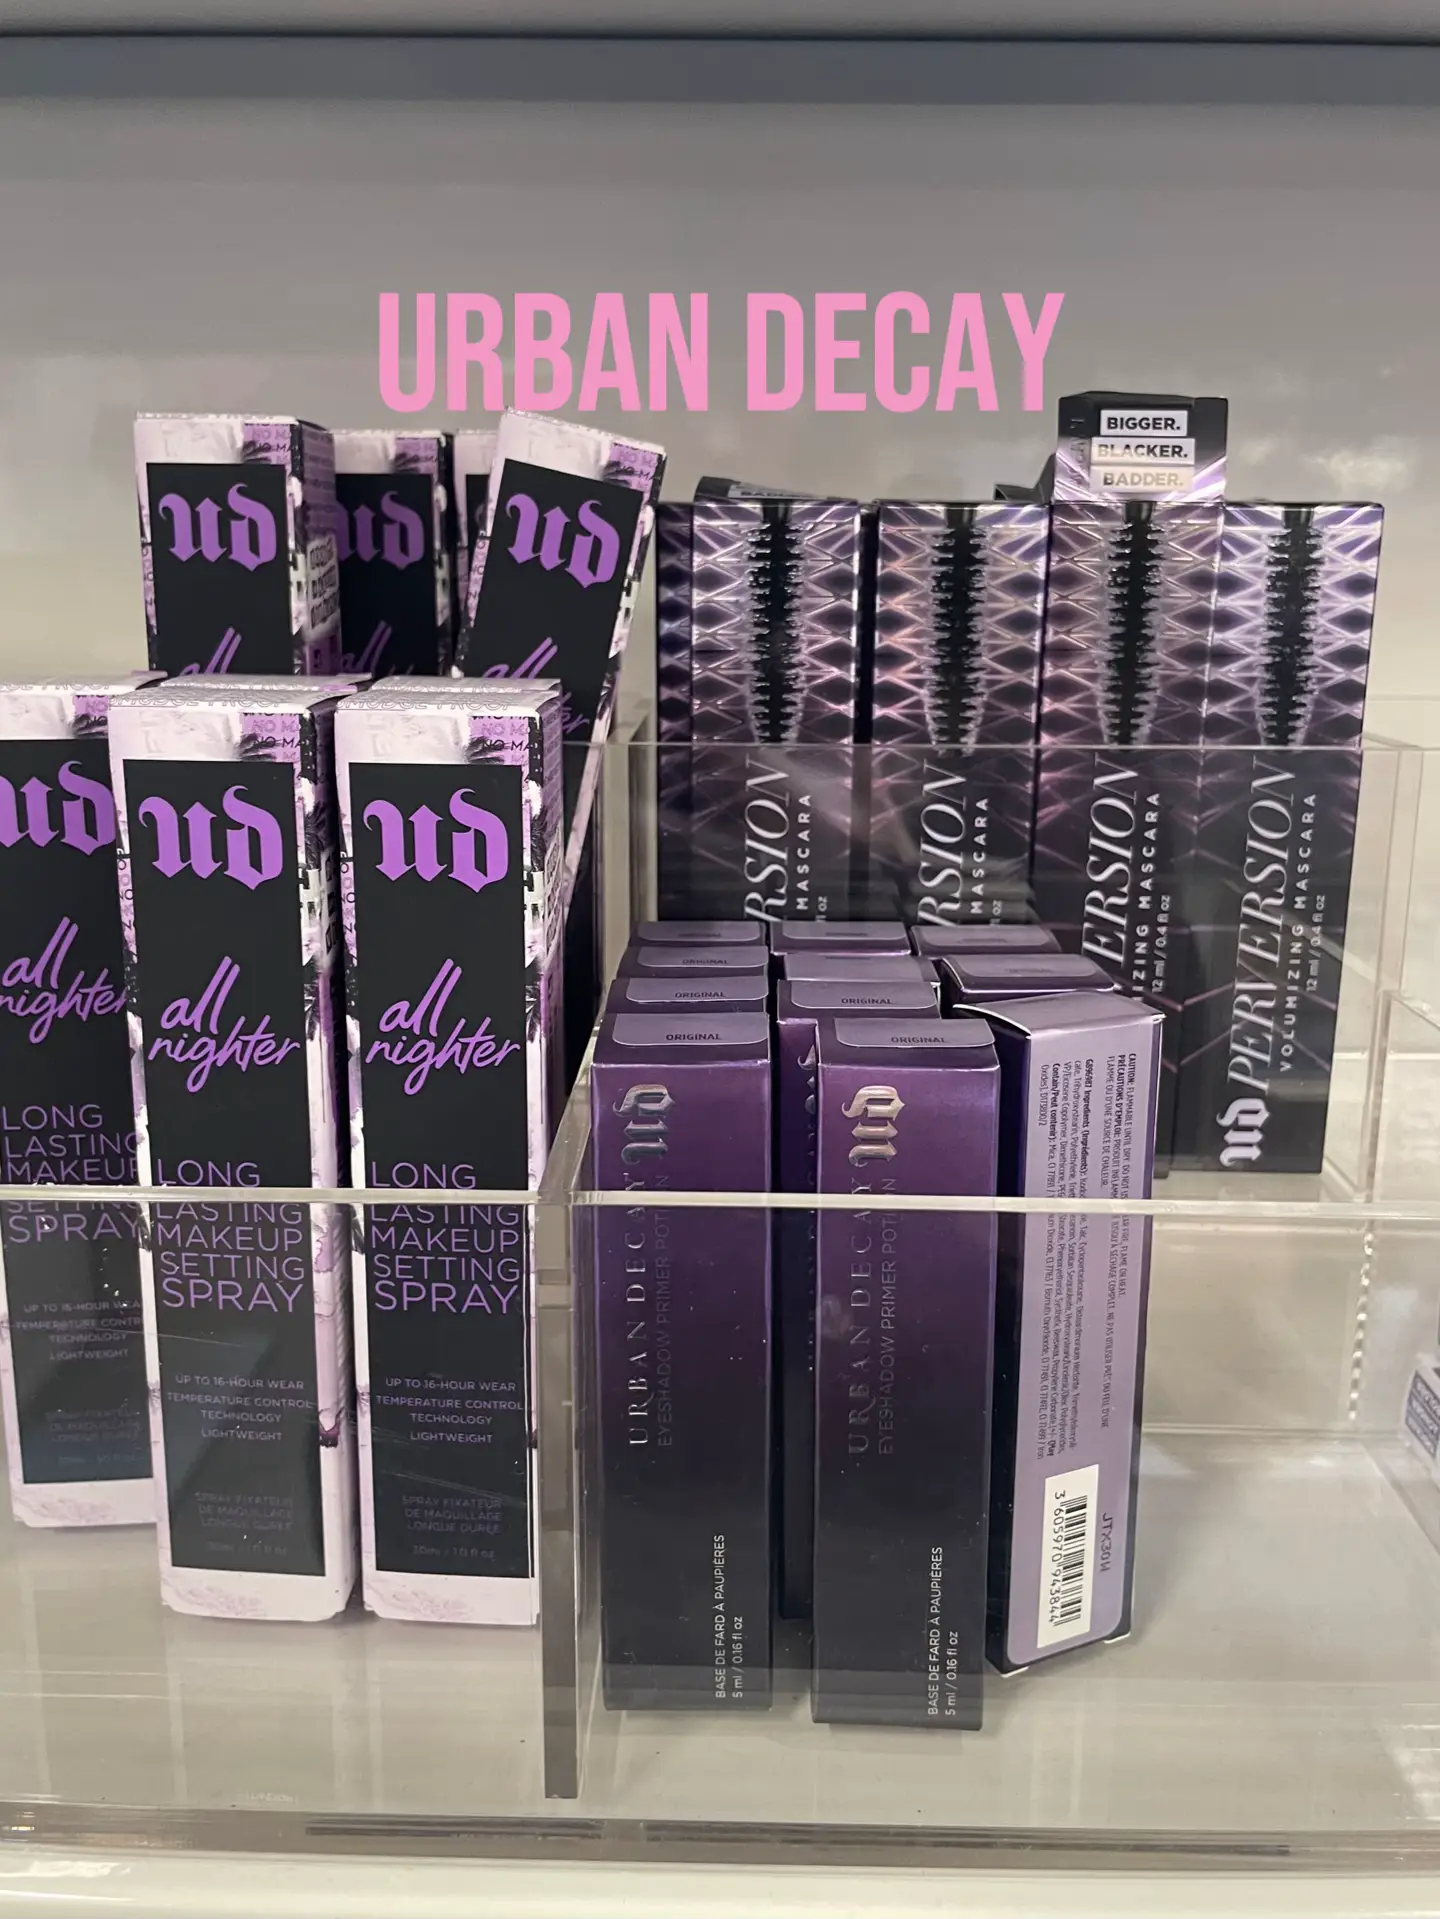 High End Makeup Deals at Nordstrom Rack (I found the Urban Decay